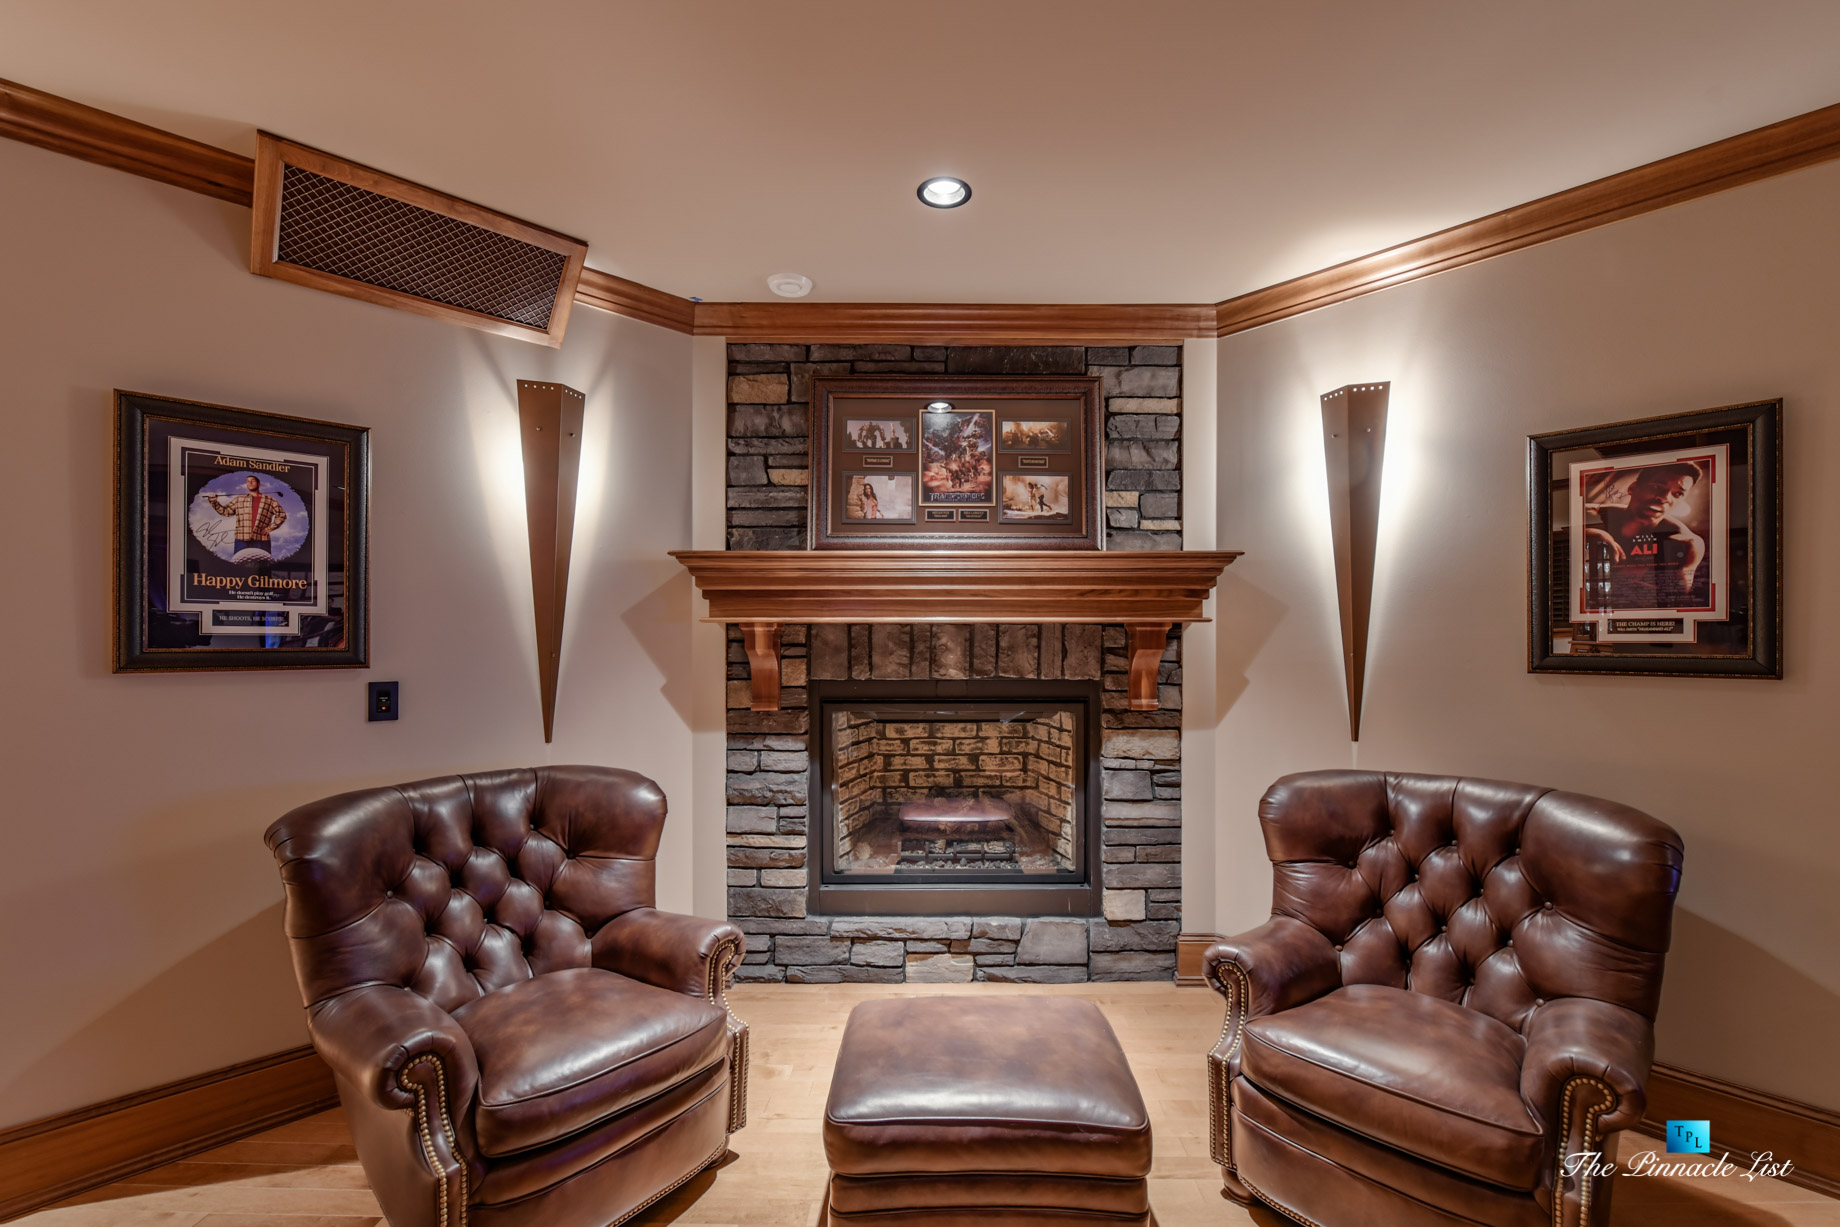 3053 Anmore Creek Way, Anmore, BC, Canada – Basement Man Cave Fireplace and Lounge Chairs – Luxury Real Estate – Greater Vancouver Home